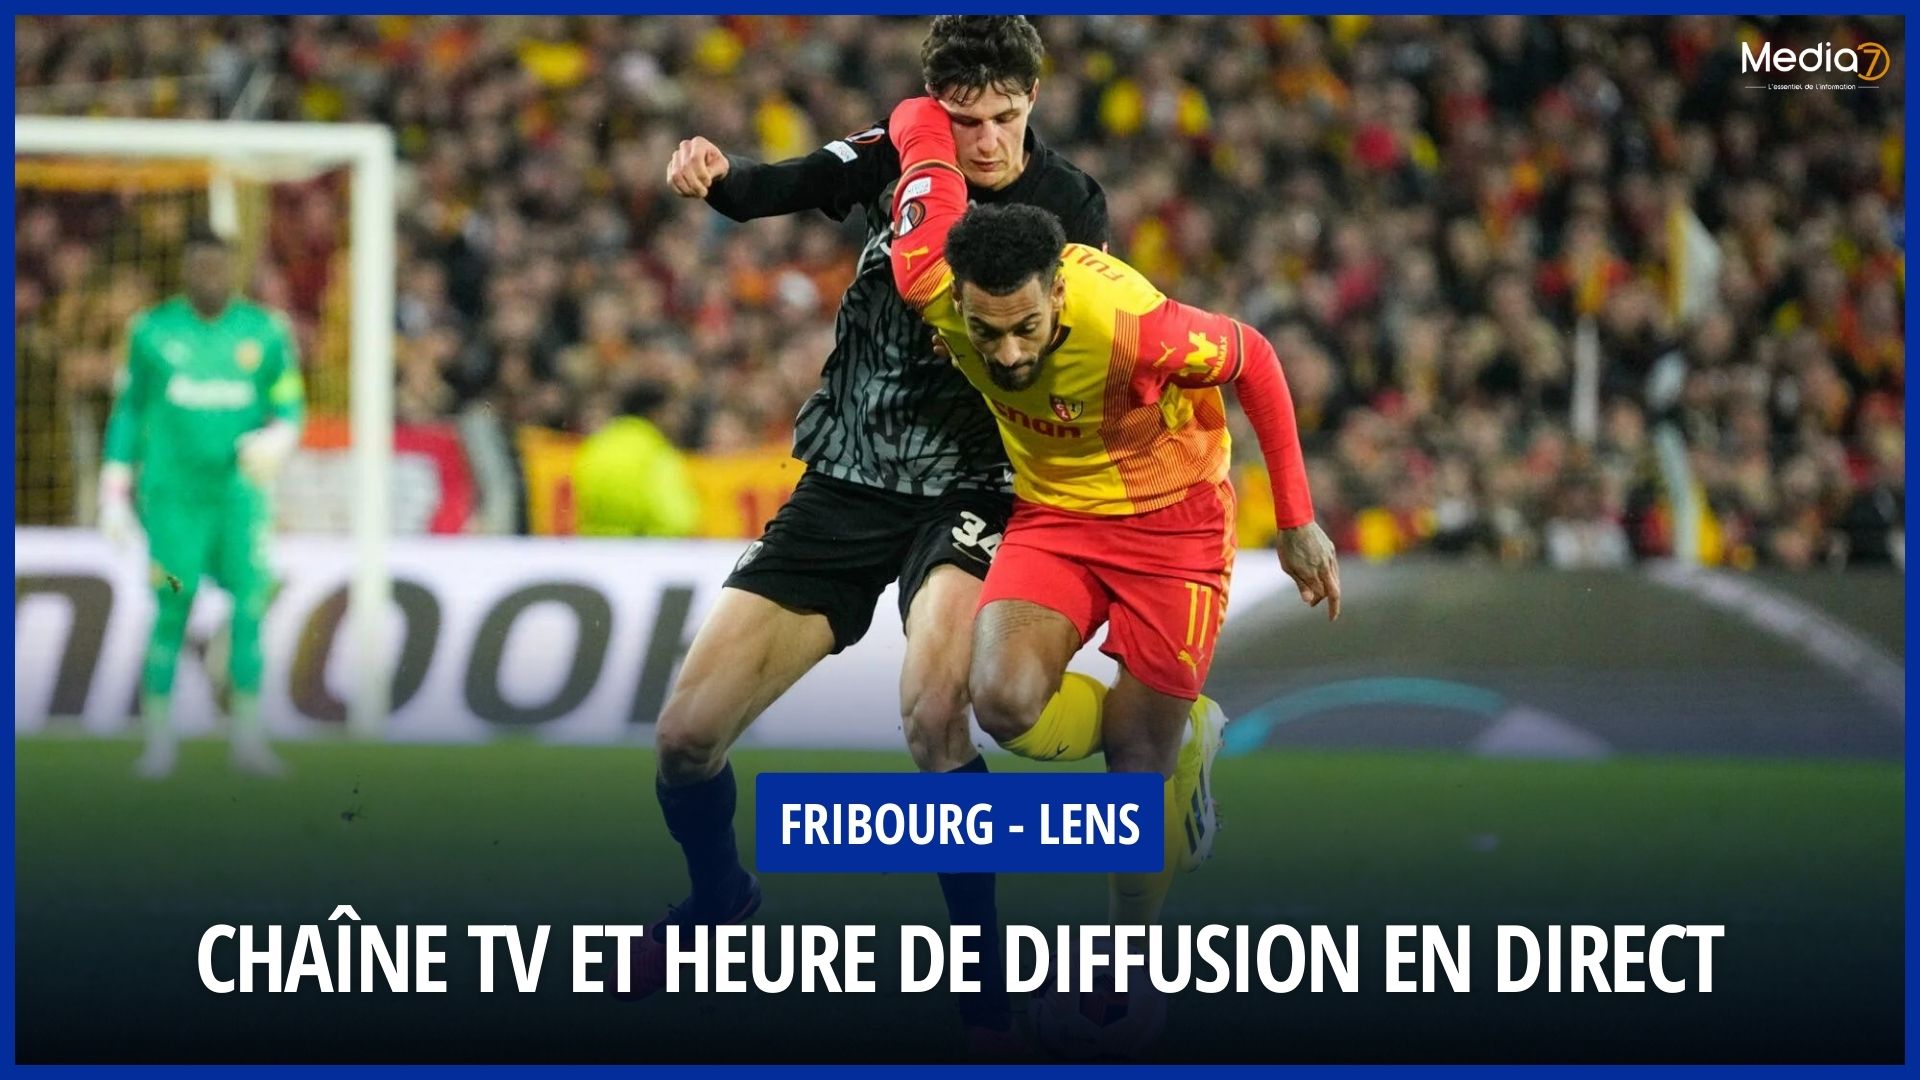 Friborg – Lens match live: On which TV & streaming channel? At what time ? - Media7